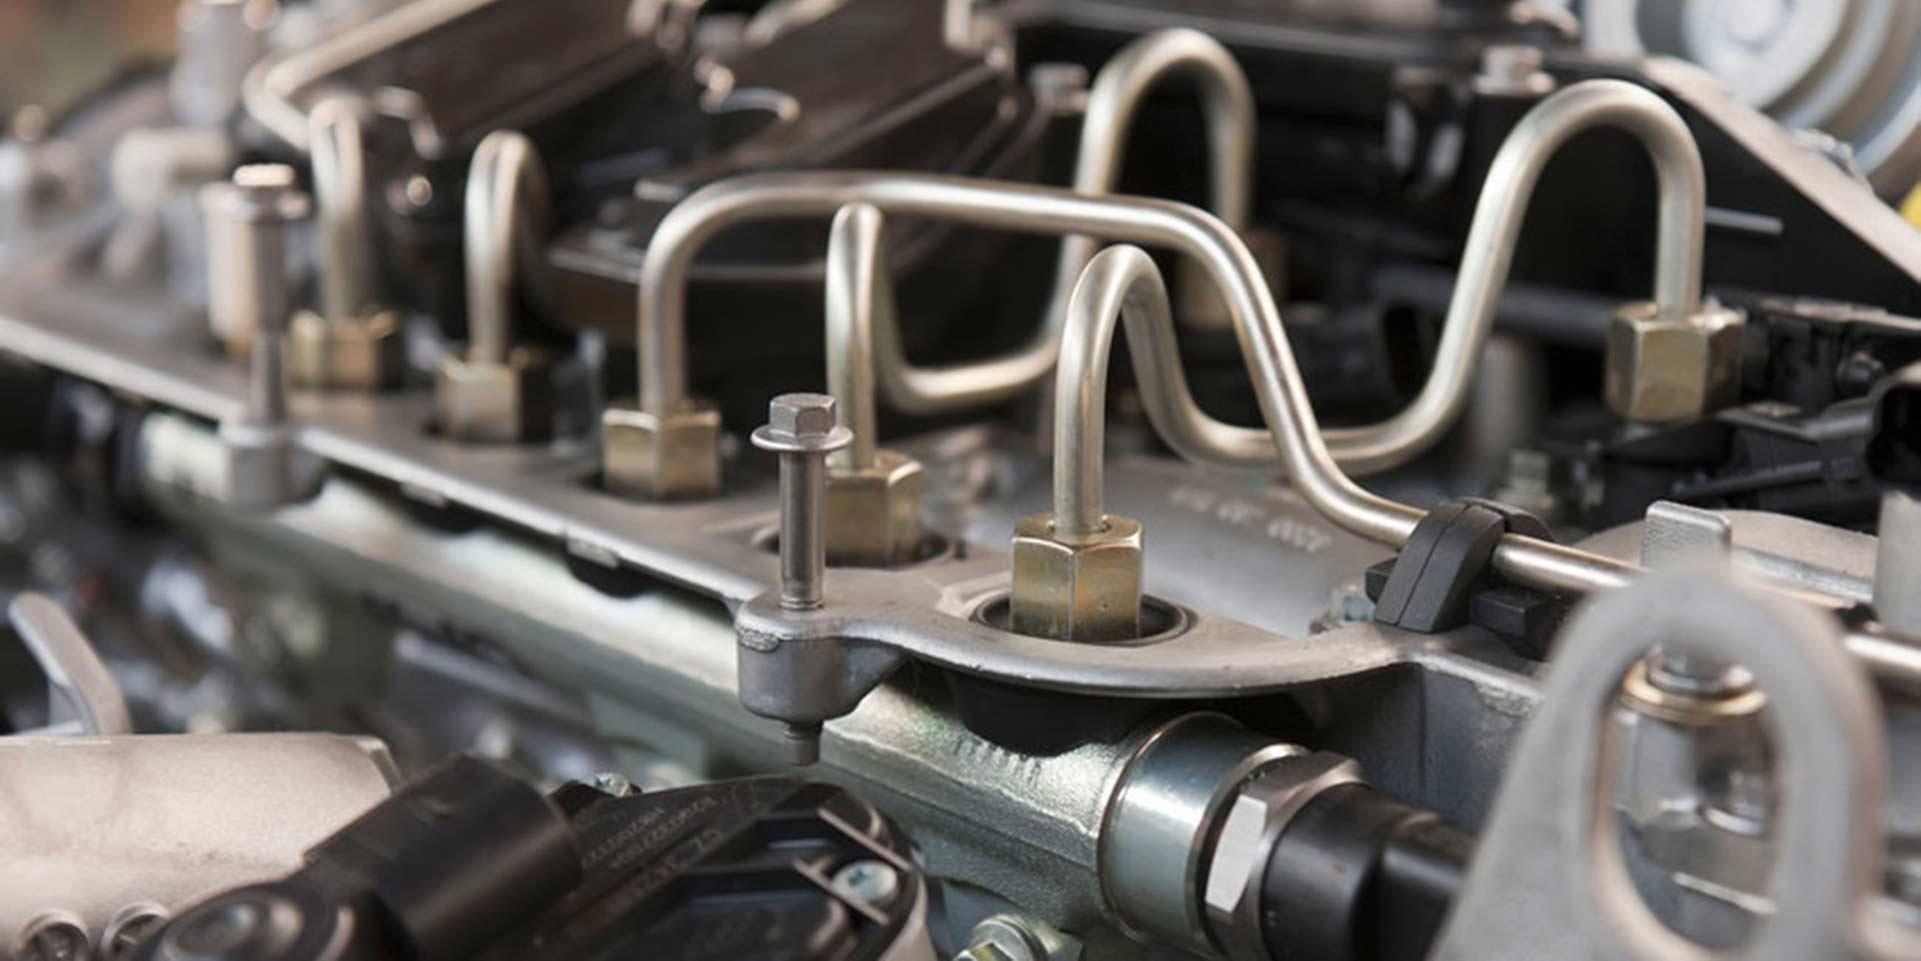 Contact us today to schedule your diesel repair. JT's Auto & Diesel Tempe (480)553-6276